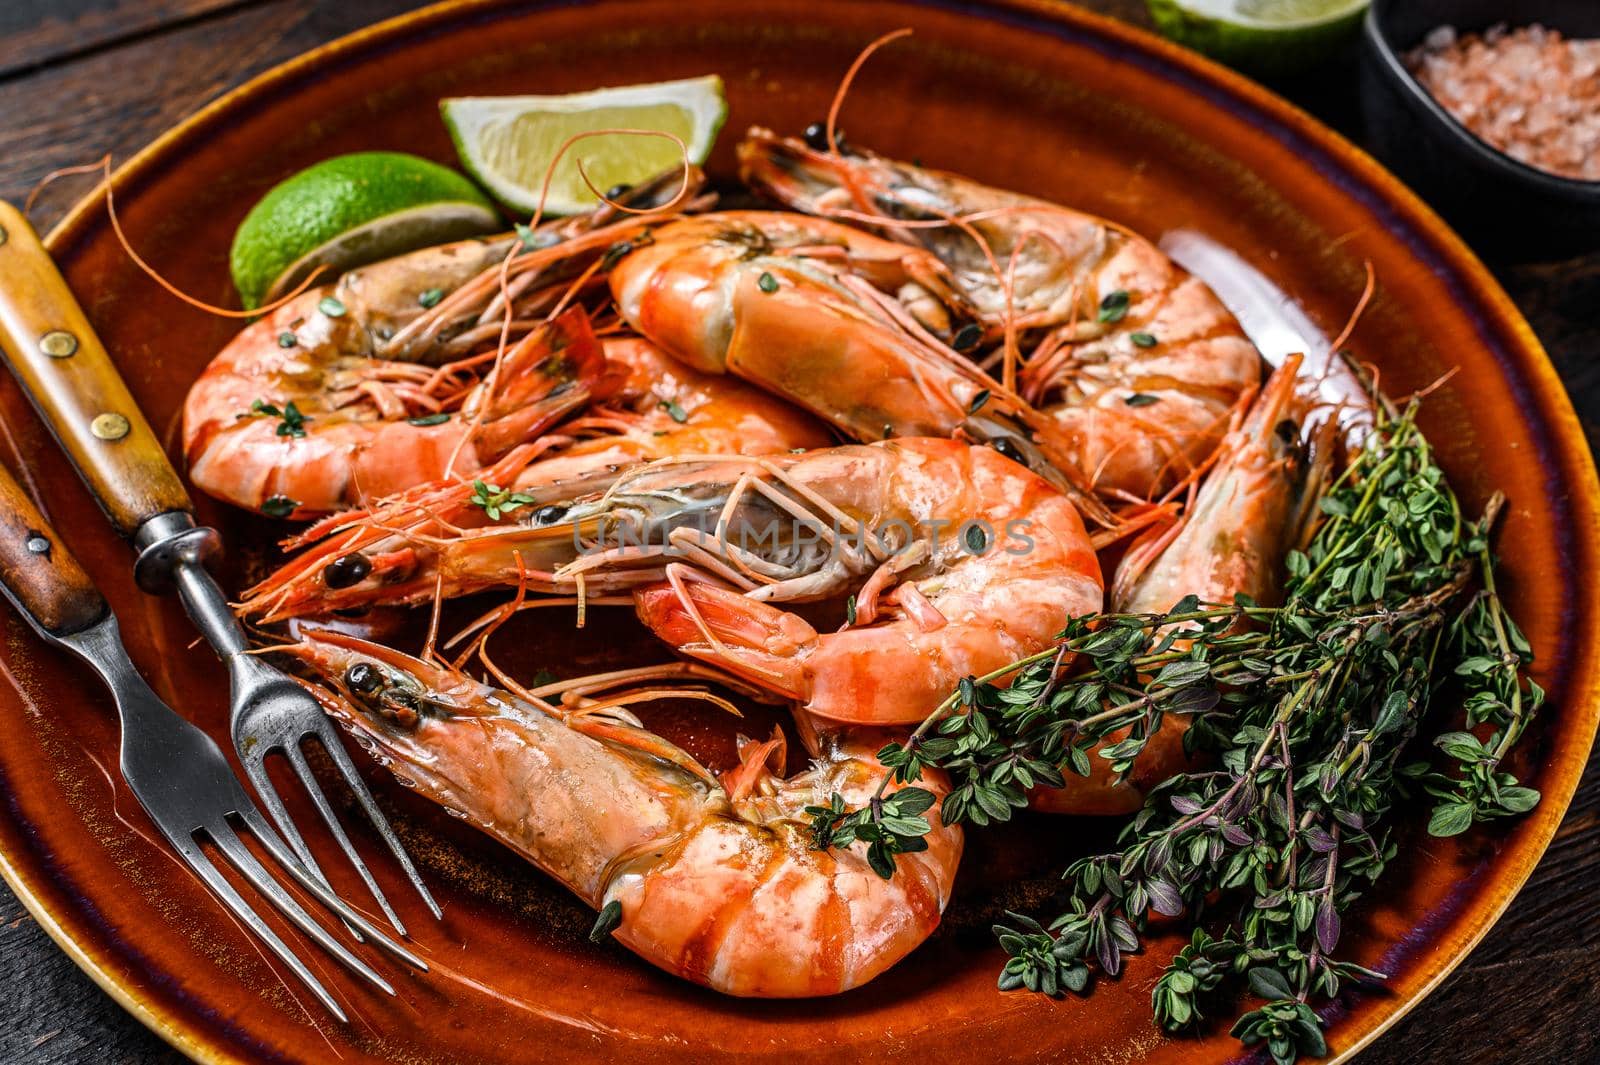 Roasted giant tiger shrimps Prawns on a plate. Dark wooden background. Top view by Composter